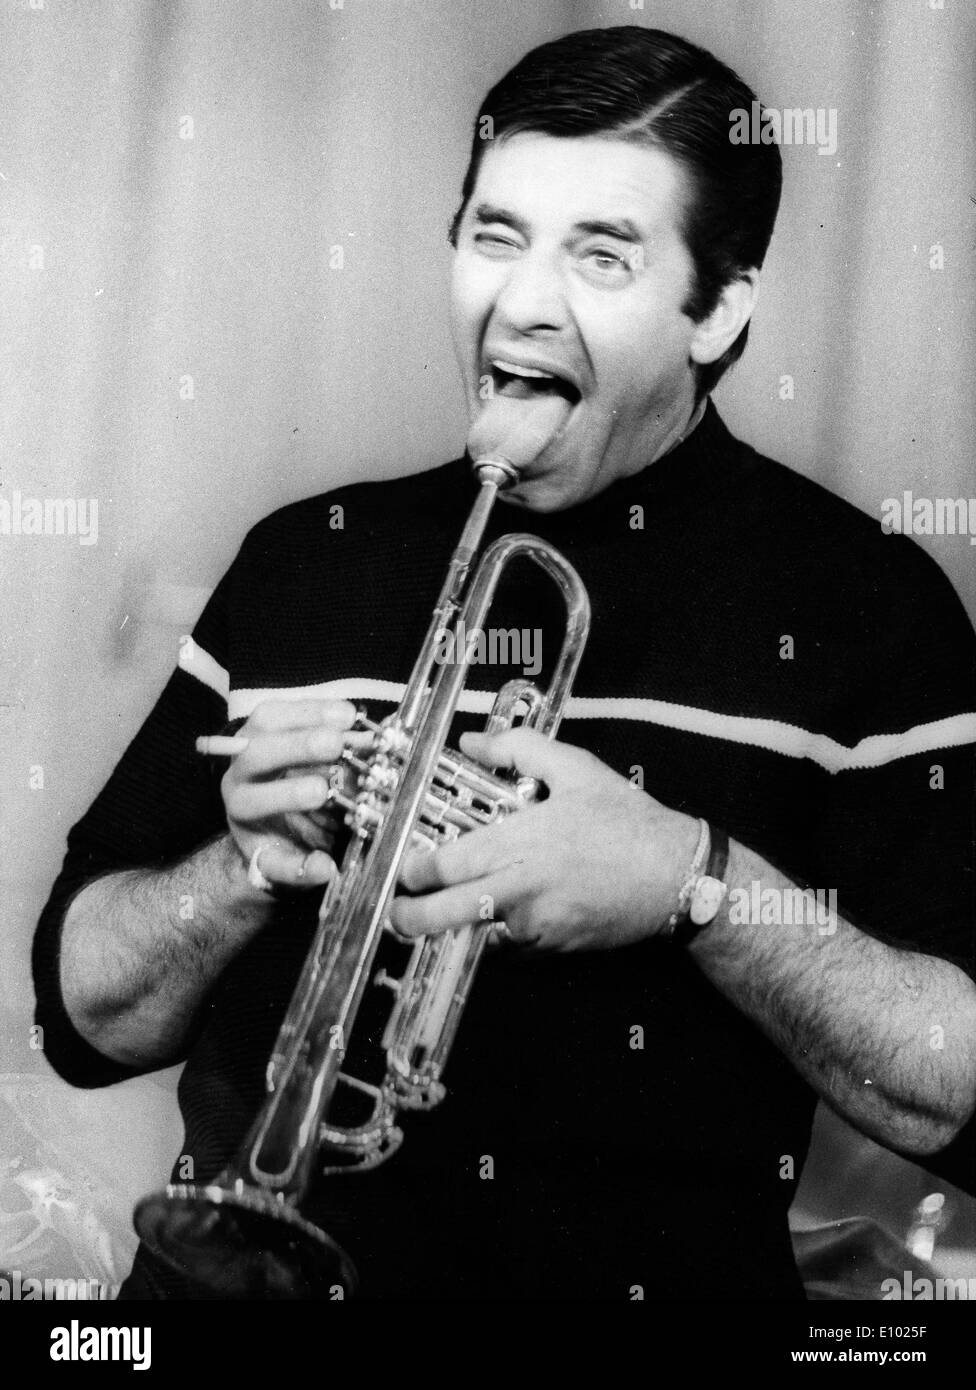 Comedian actor Jerry Lewis playing the trumpet Stock Photo